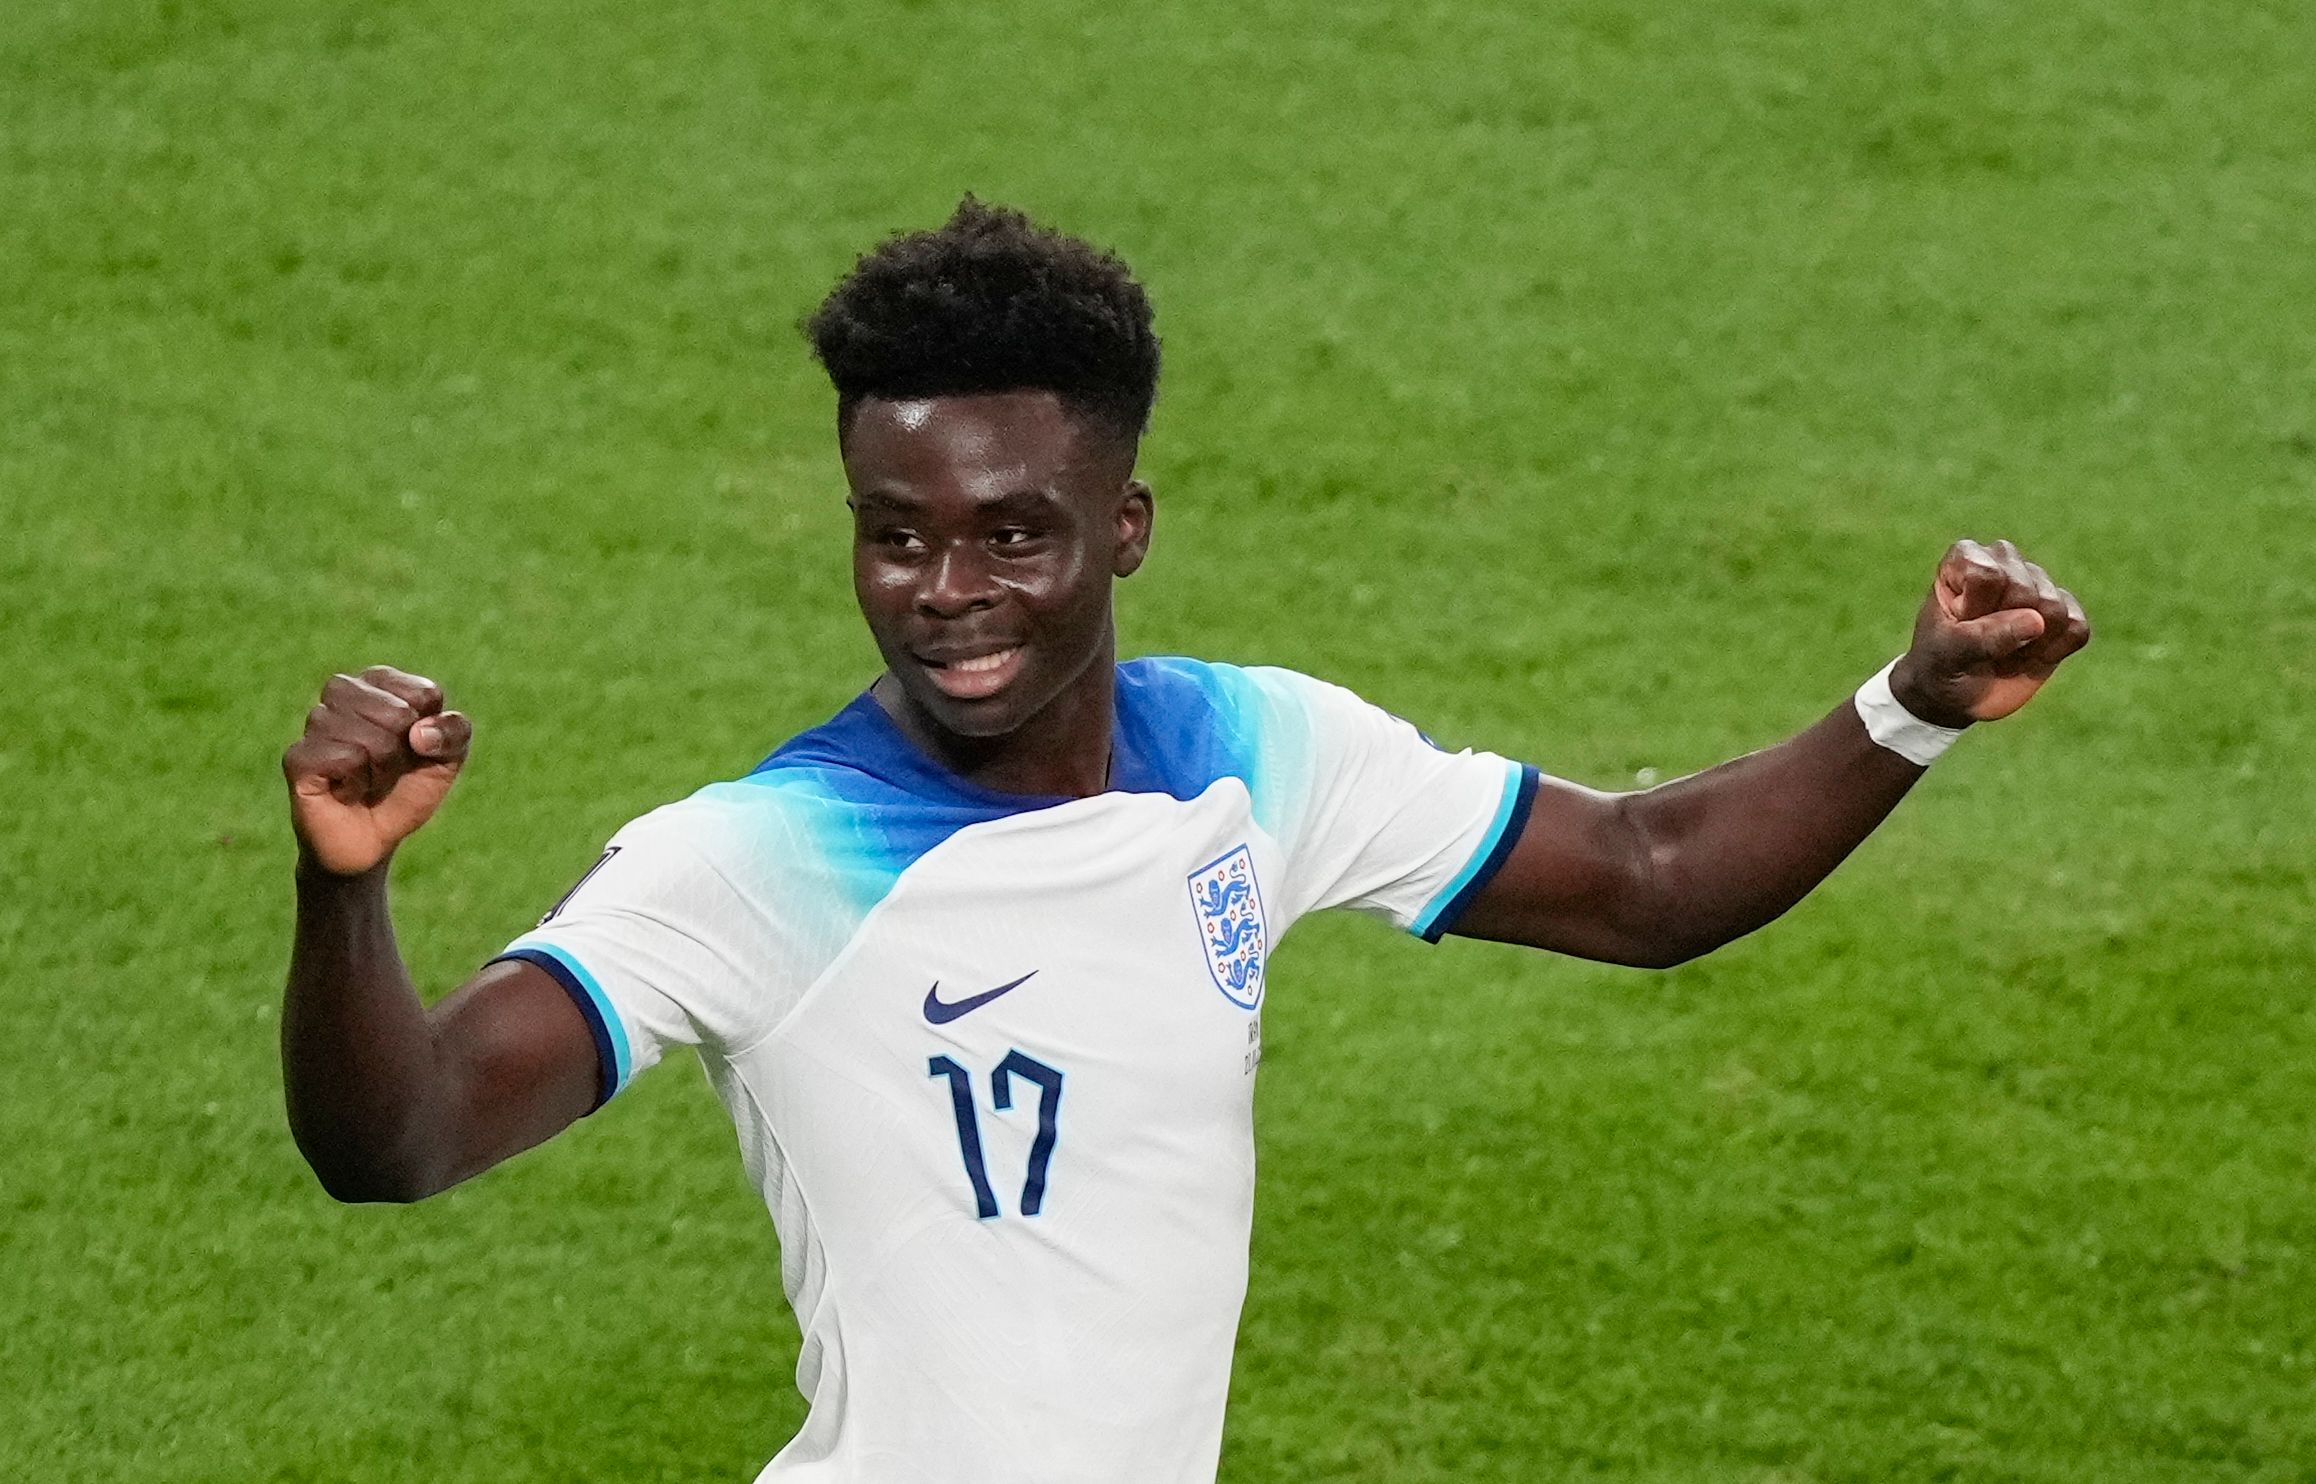 Saka with a smile on his face with both his fists balled up to celebrate England's fourth goal